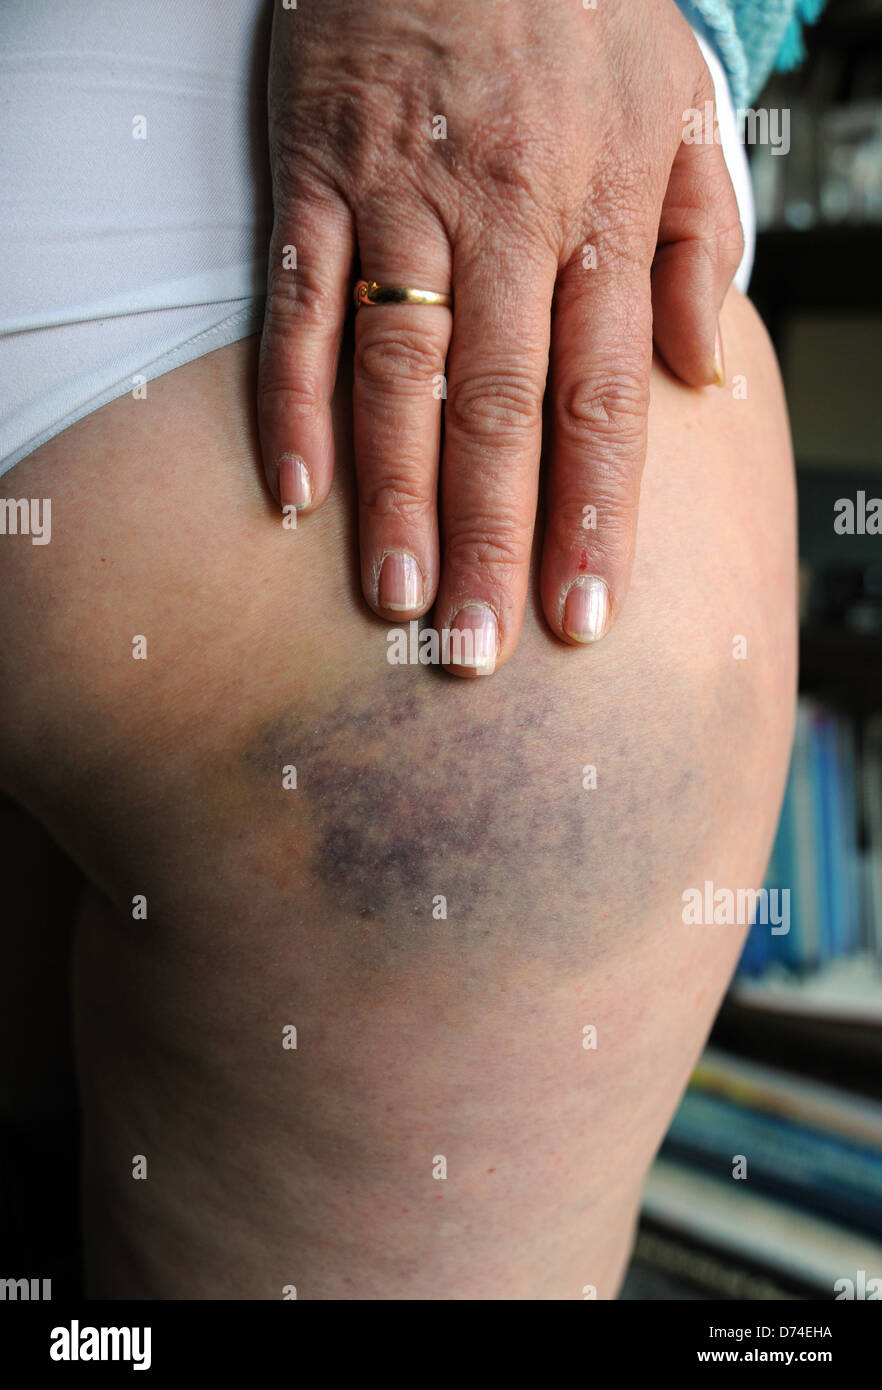 Woman shows injury with heavy bruising to skin on upper thigh area of leg after a fall Stock Photo